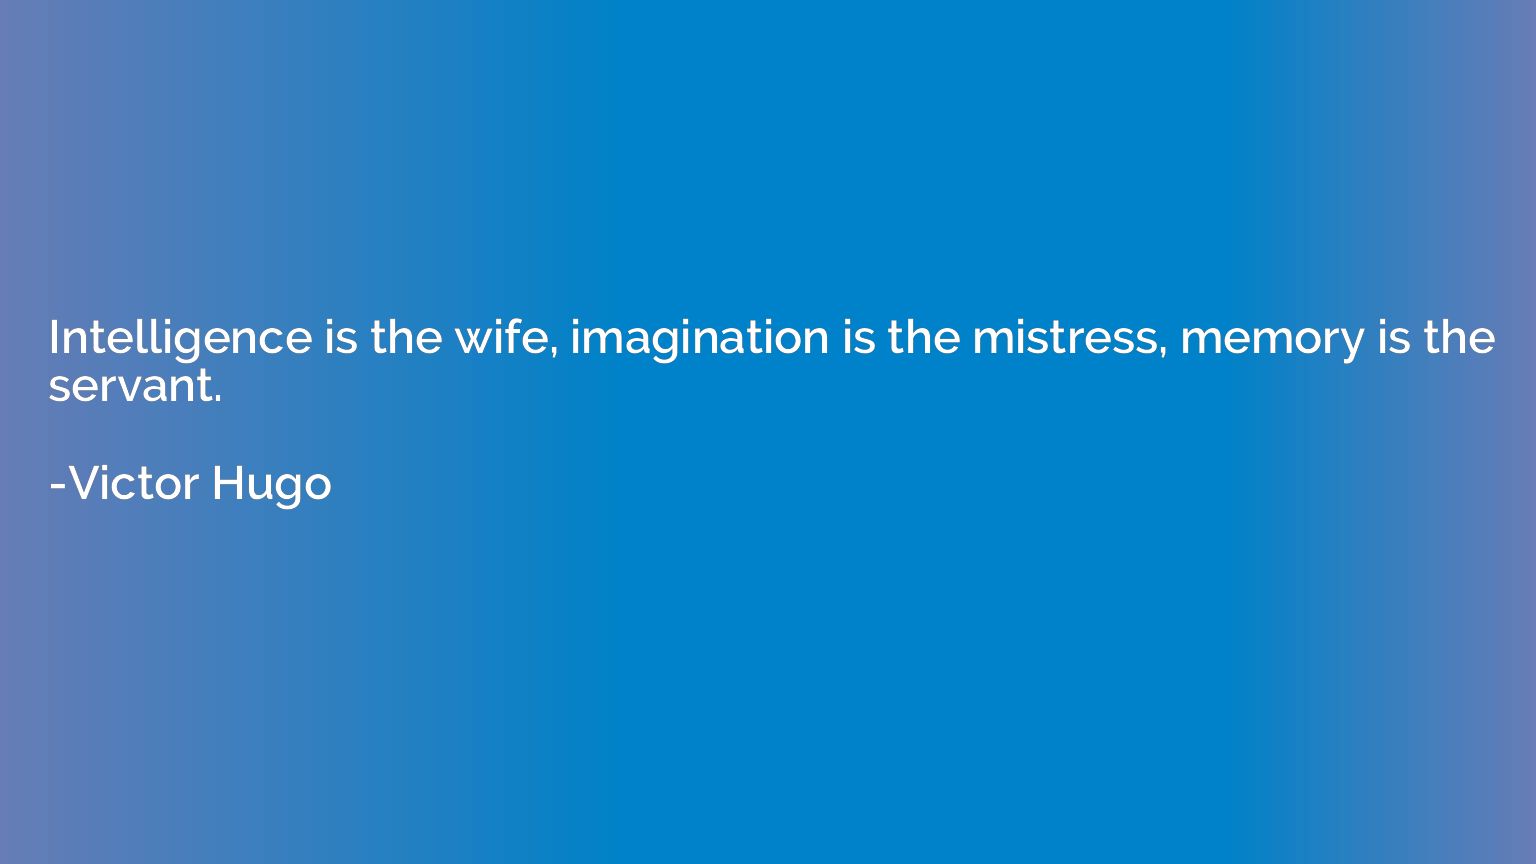 Intelligence is the wife, imagination is the mistress, memor